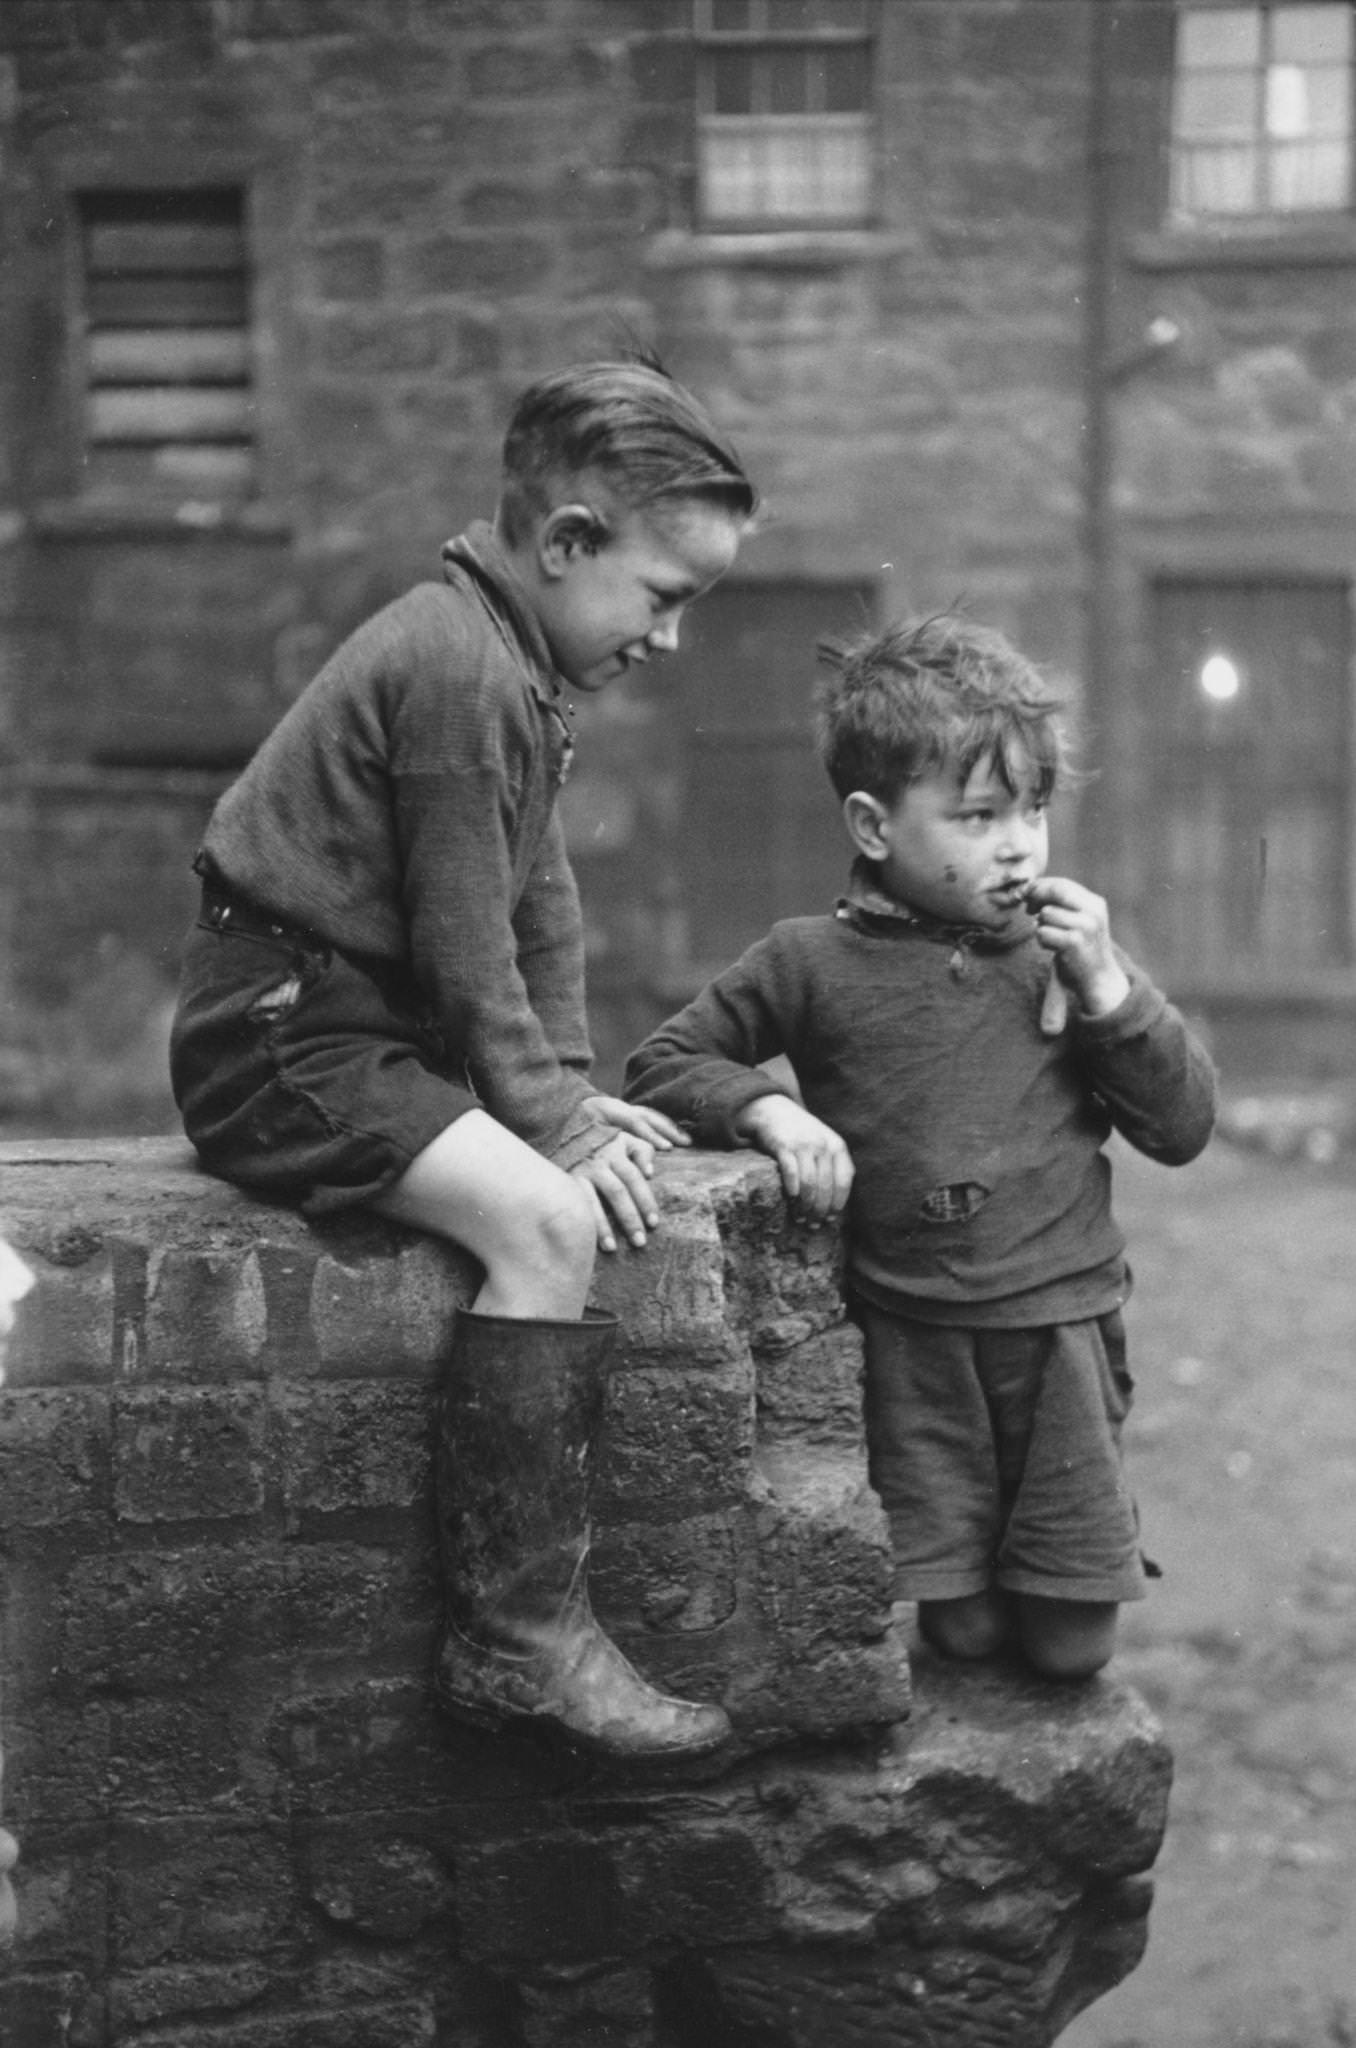 Two young boys from the Gorbals area of Glasgow, 1948